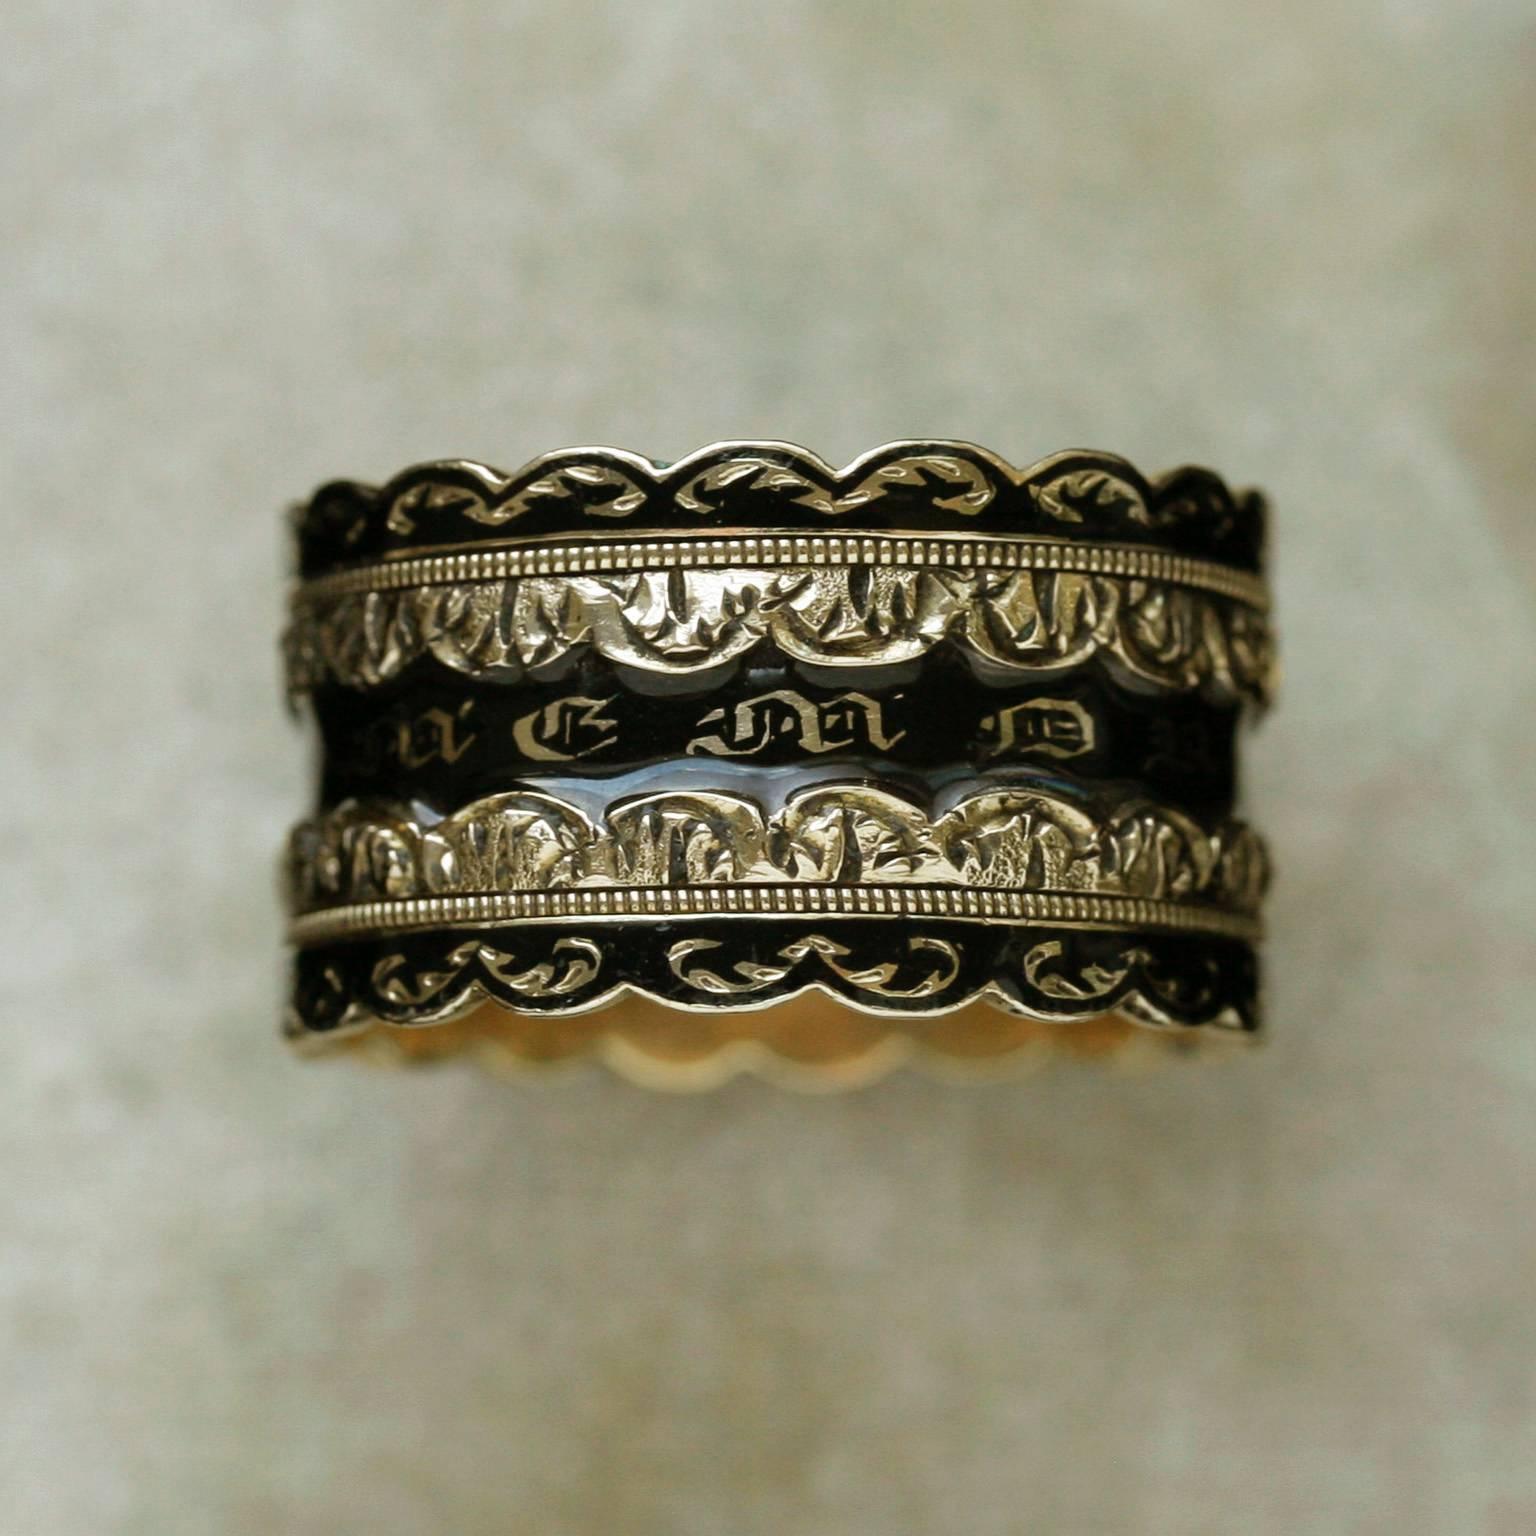 C.1831. A gorgeous black enamel wide mourning ring.  The ring has 'in memory of' gothic script. The inner band engraving shows; T.J. Allen Esq. The ring contains the full English hallmarks : WK (makers mark), 18k, London 1831. 

US Size: 9.5 
Width: